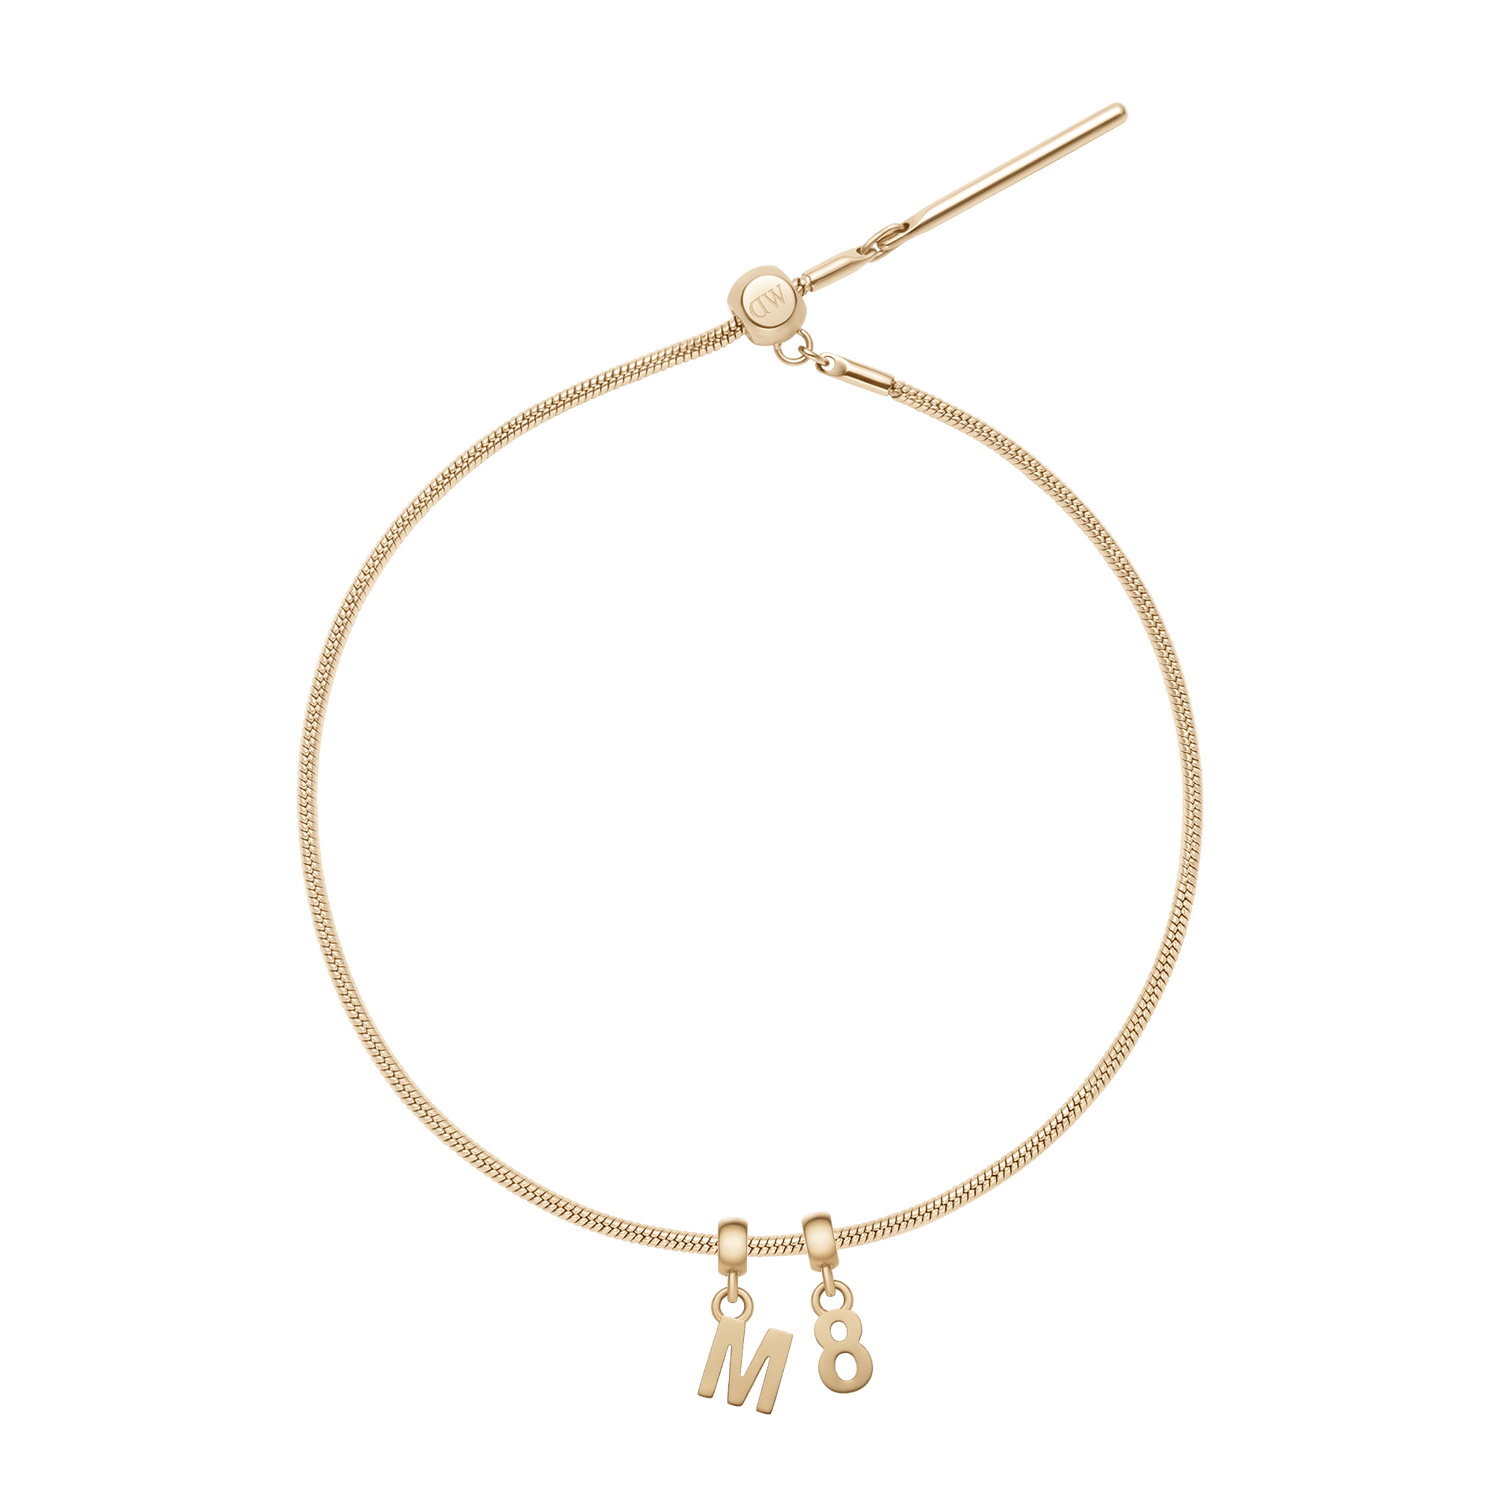 Charm Snake Bracelet + Your Choice of Letter Charm + Number Charm